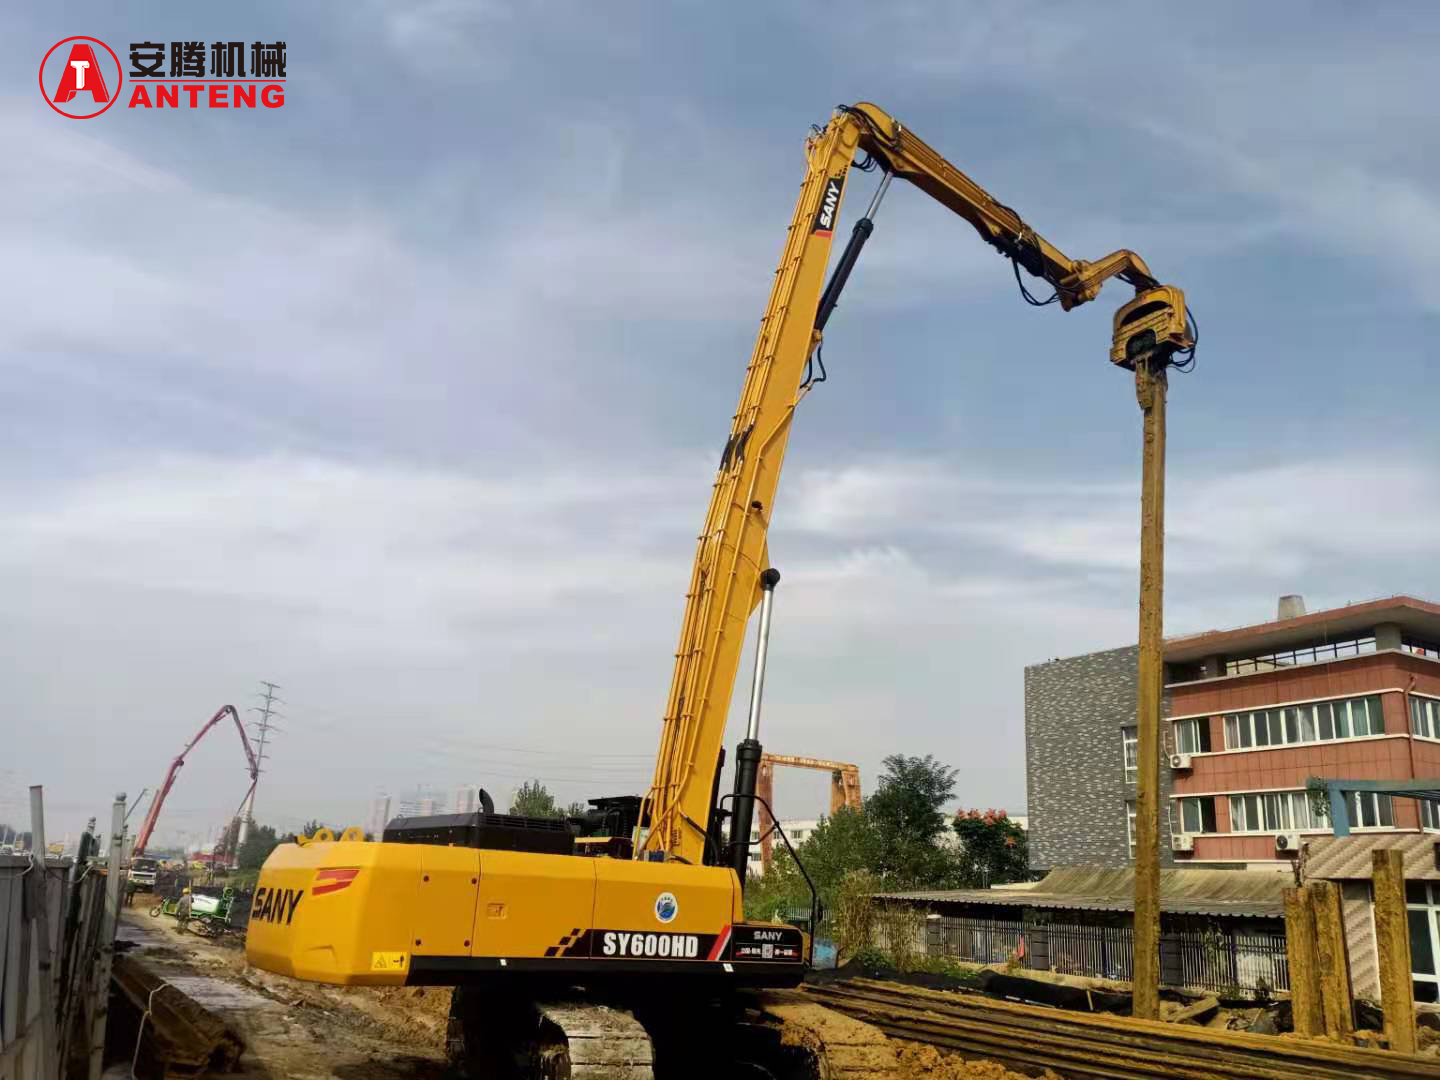 Anteng V500 with SANY 600 for Road Construction Works